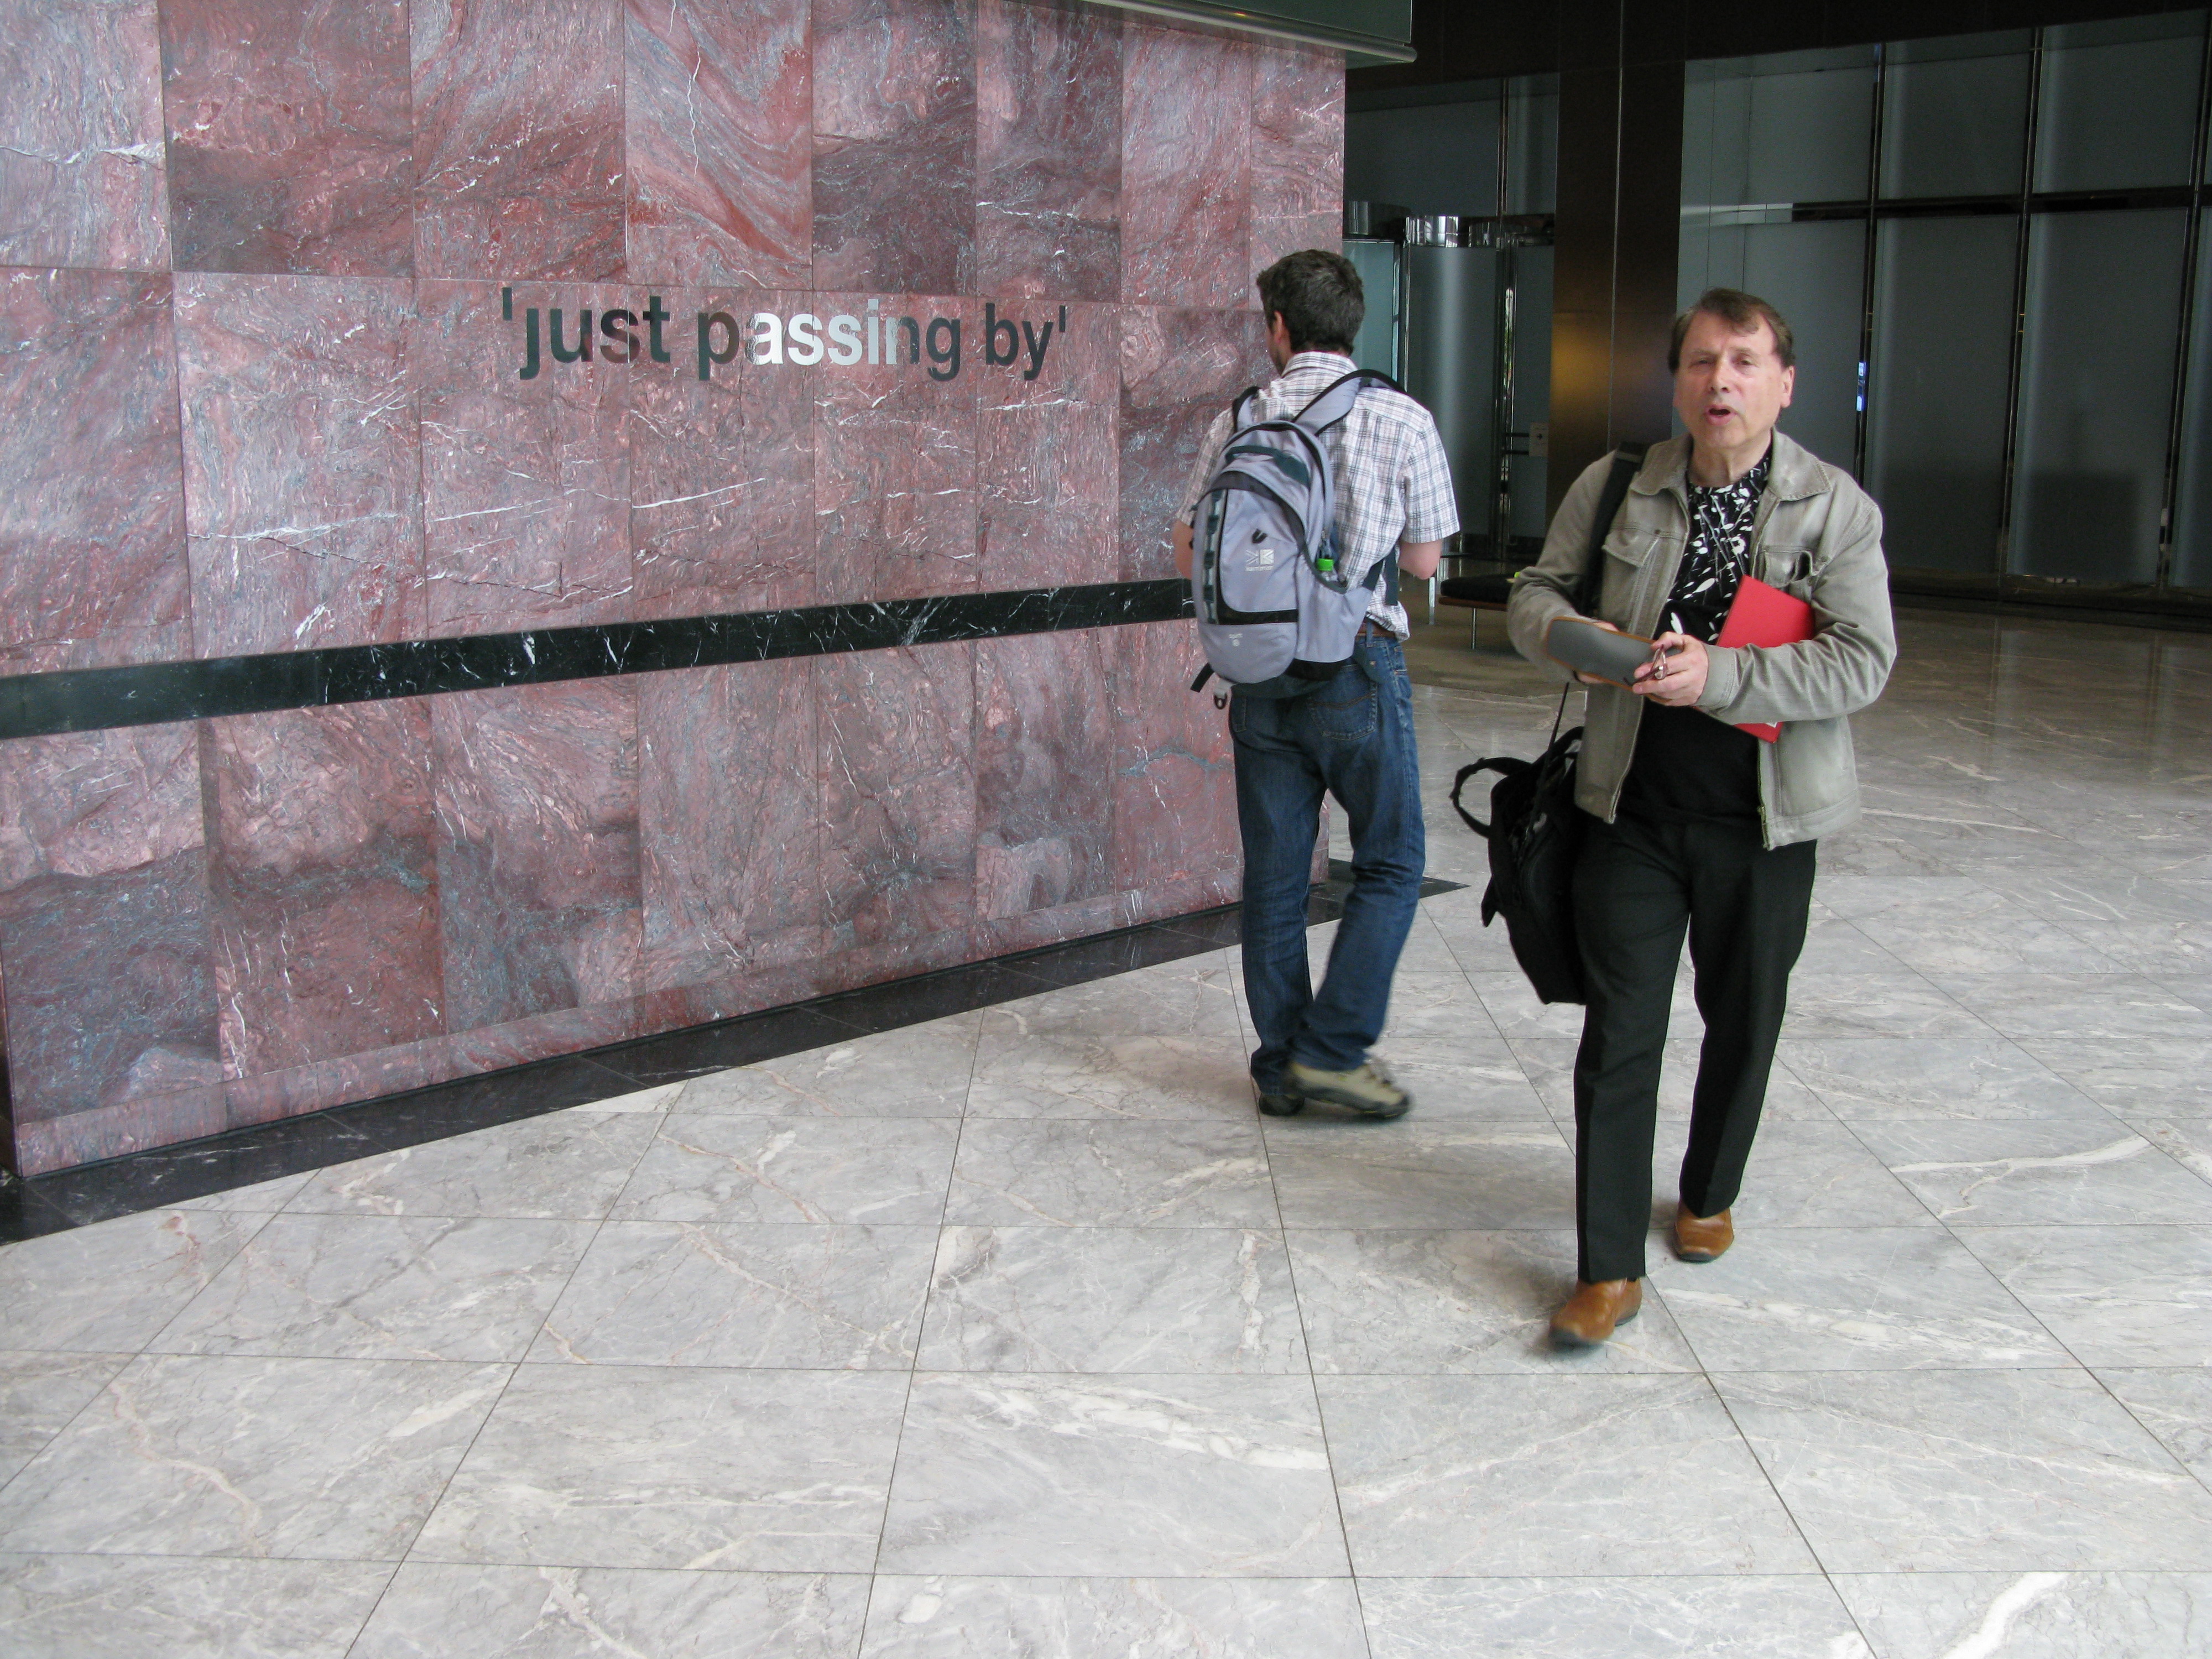 “Just passing by”, Canary Wharf Group Exhibition